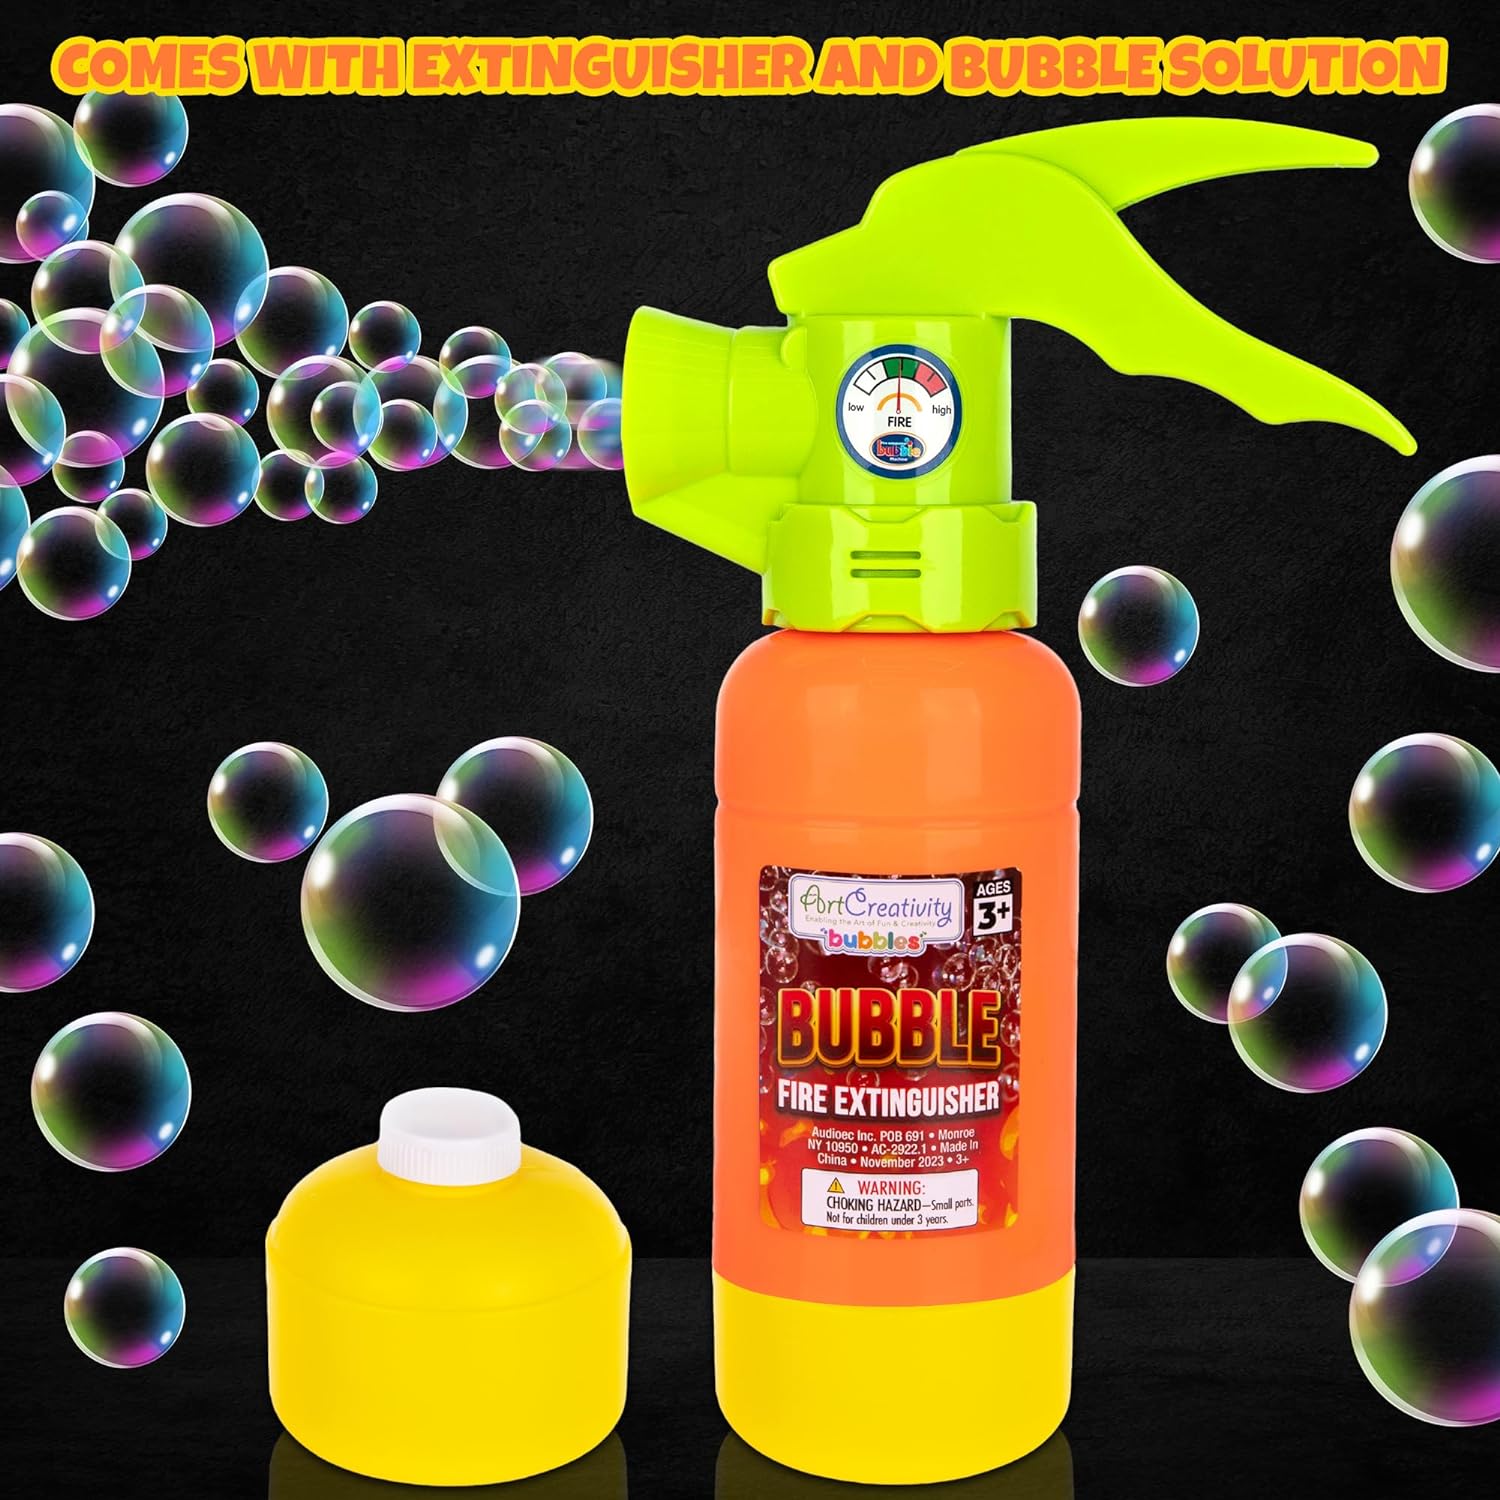 ArtCreativity Fire Extinguisher Bubble Machine for Kids - Bubble Blowing Firefighter Toy with Bubble Solution Included - Automatic Bubble Making Toy Fire Extinguisher - Fireman Props for Boys 3 4 5 6